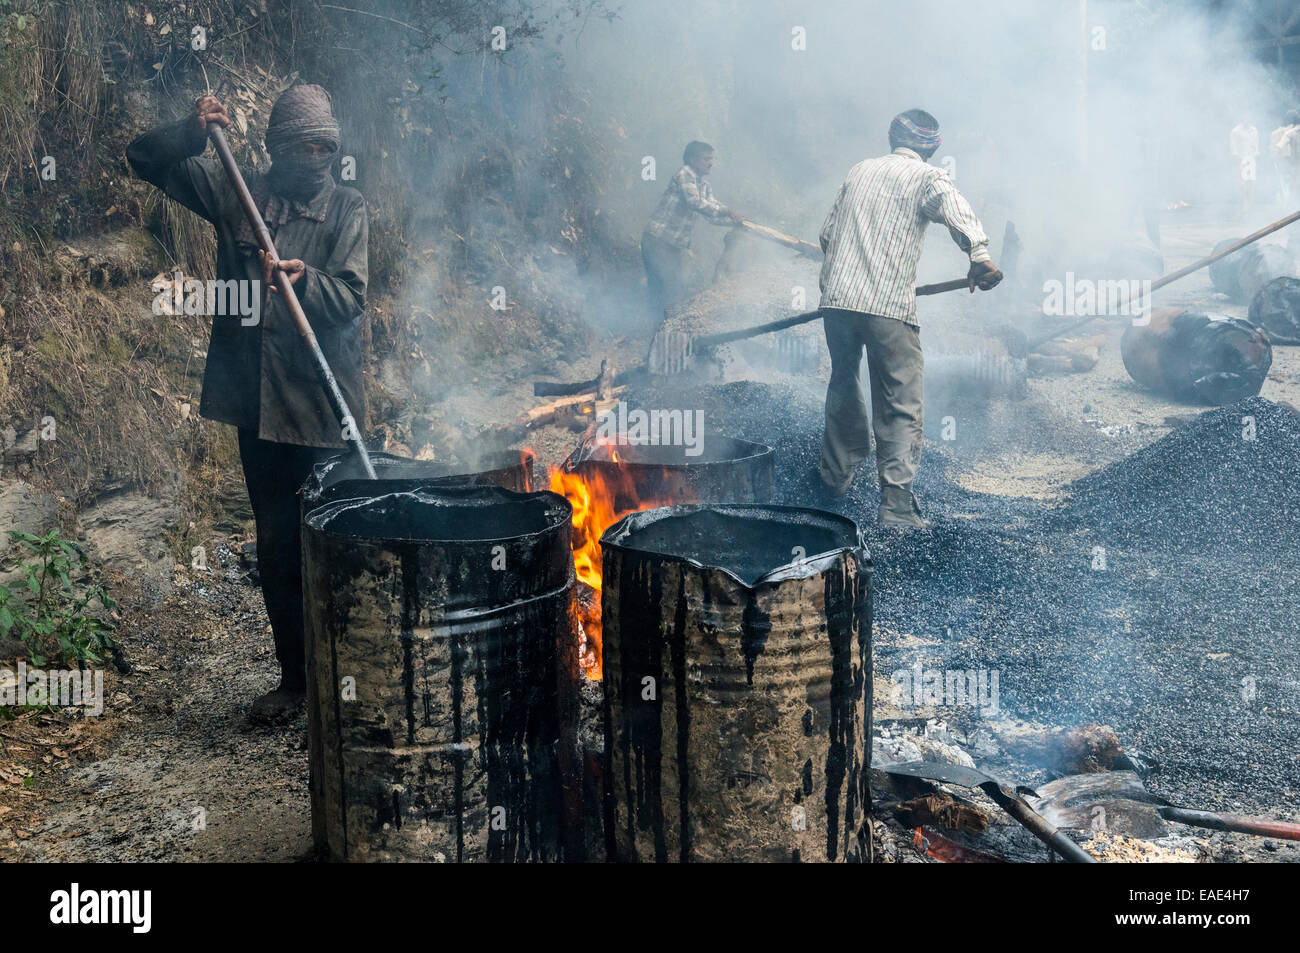 A worker heating tar in barrels with an open fire at a road construction site, Shimla, Himachal Pradesh, India Stock Photo